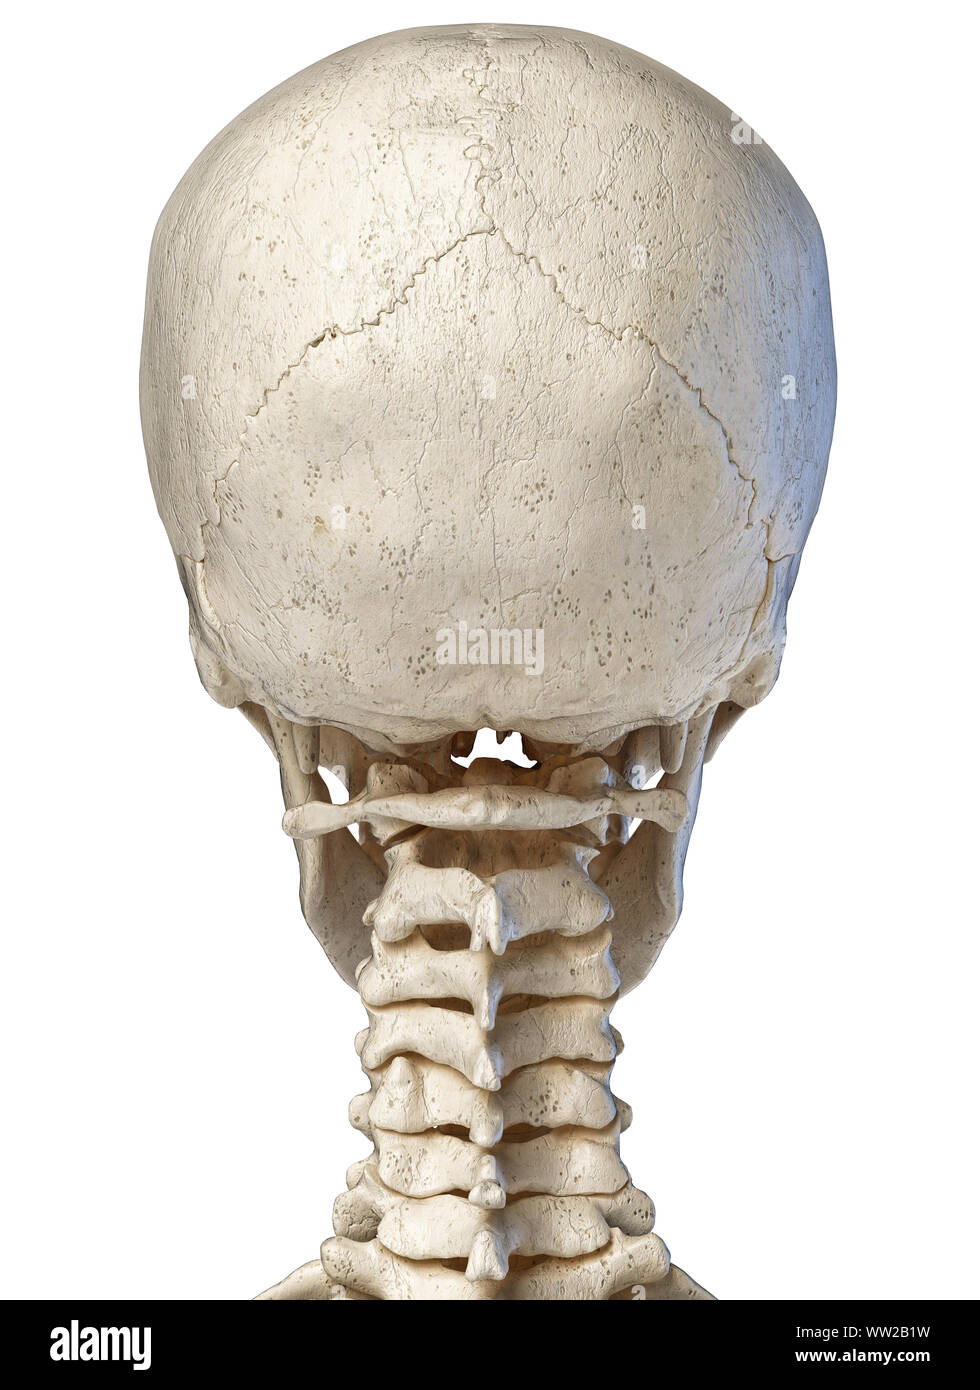 Human anatomy 3d illustration of the skull. Posterior view, on white background. Stock Photo